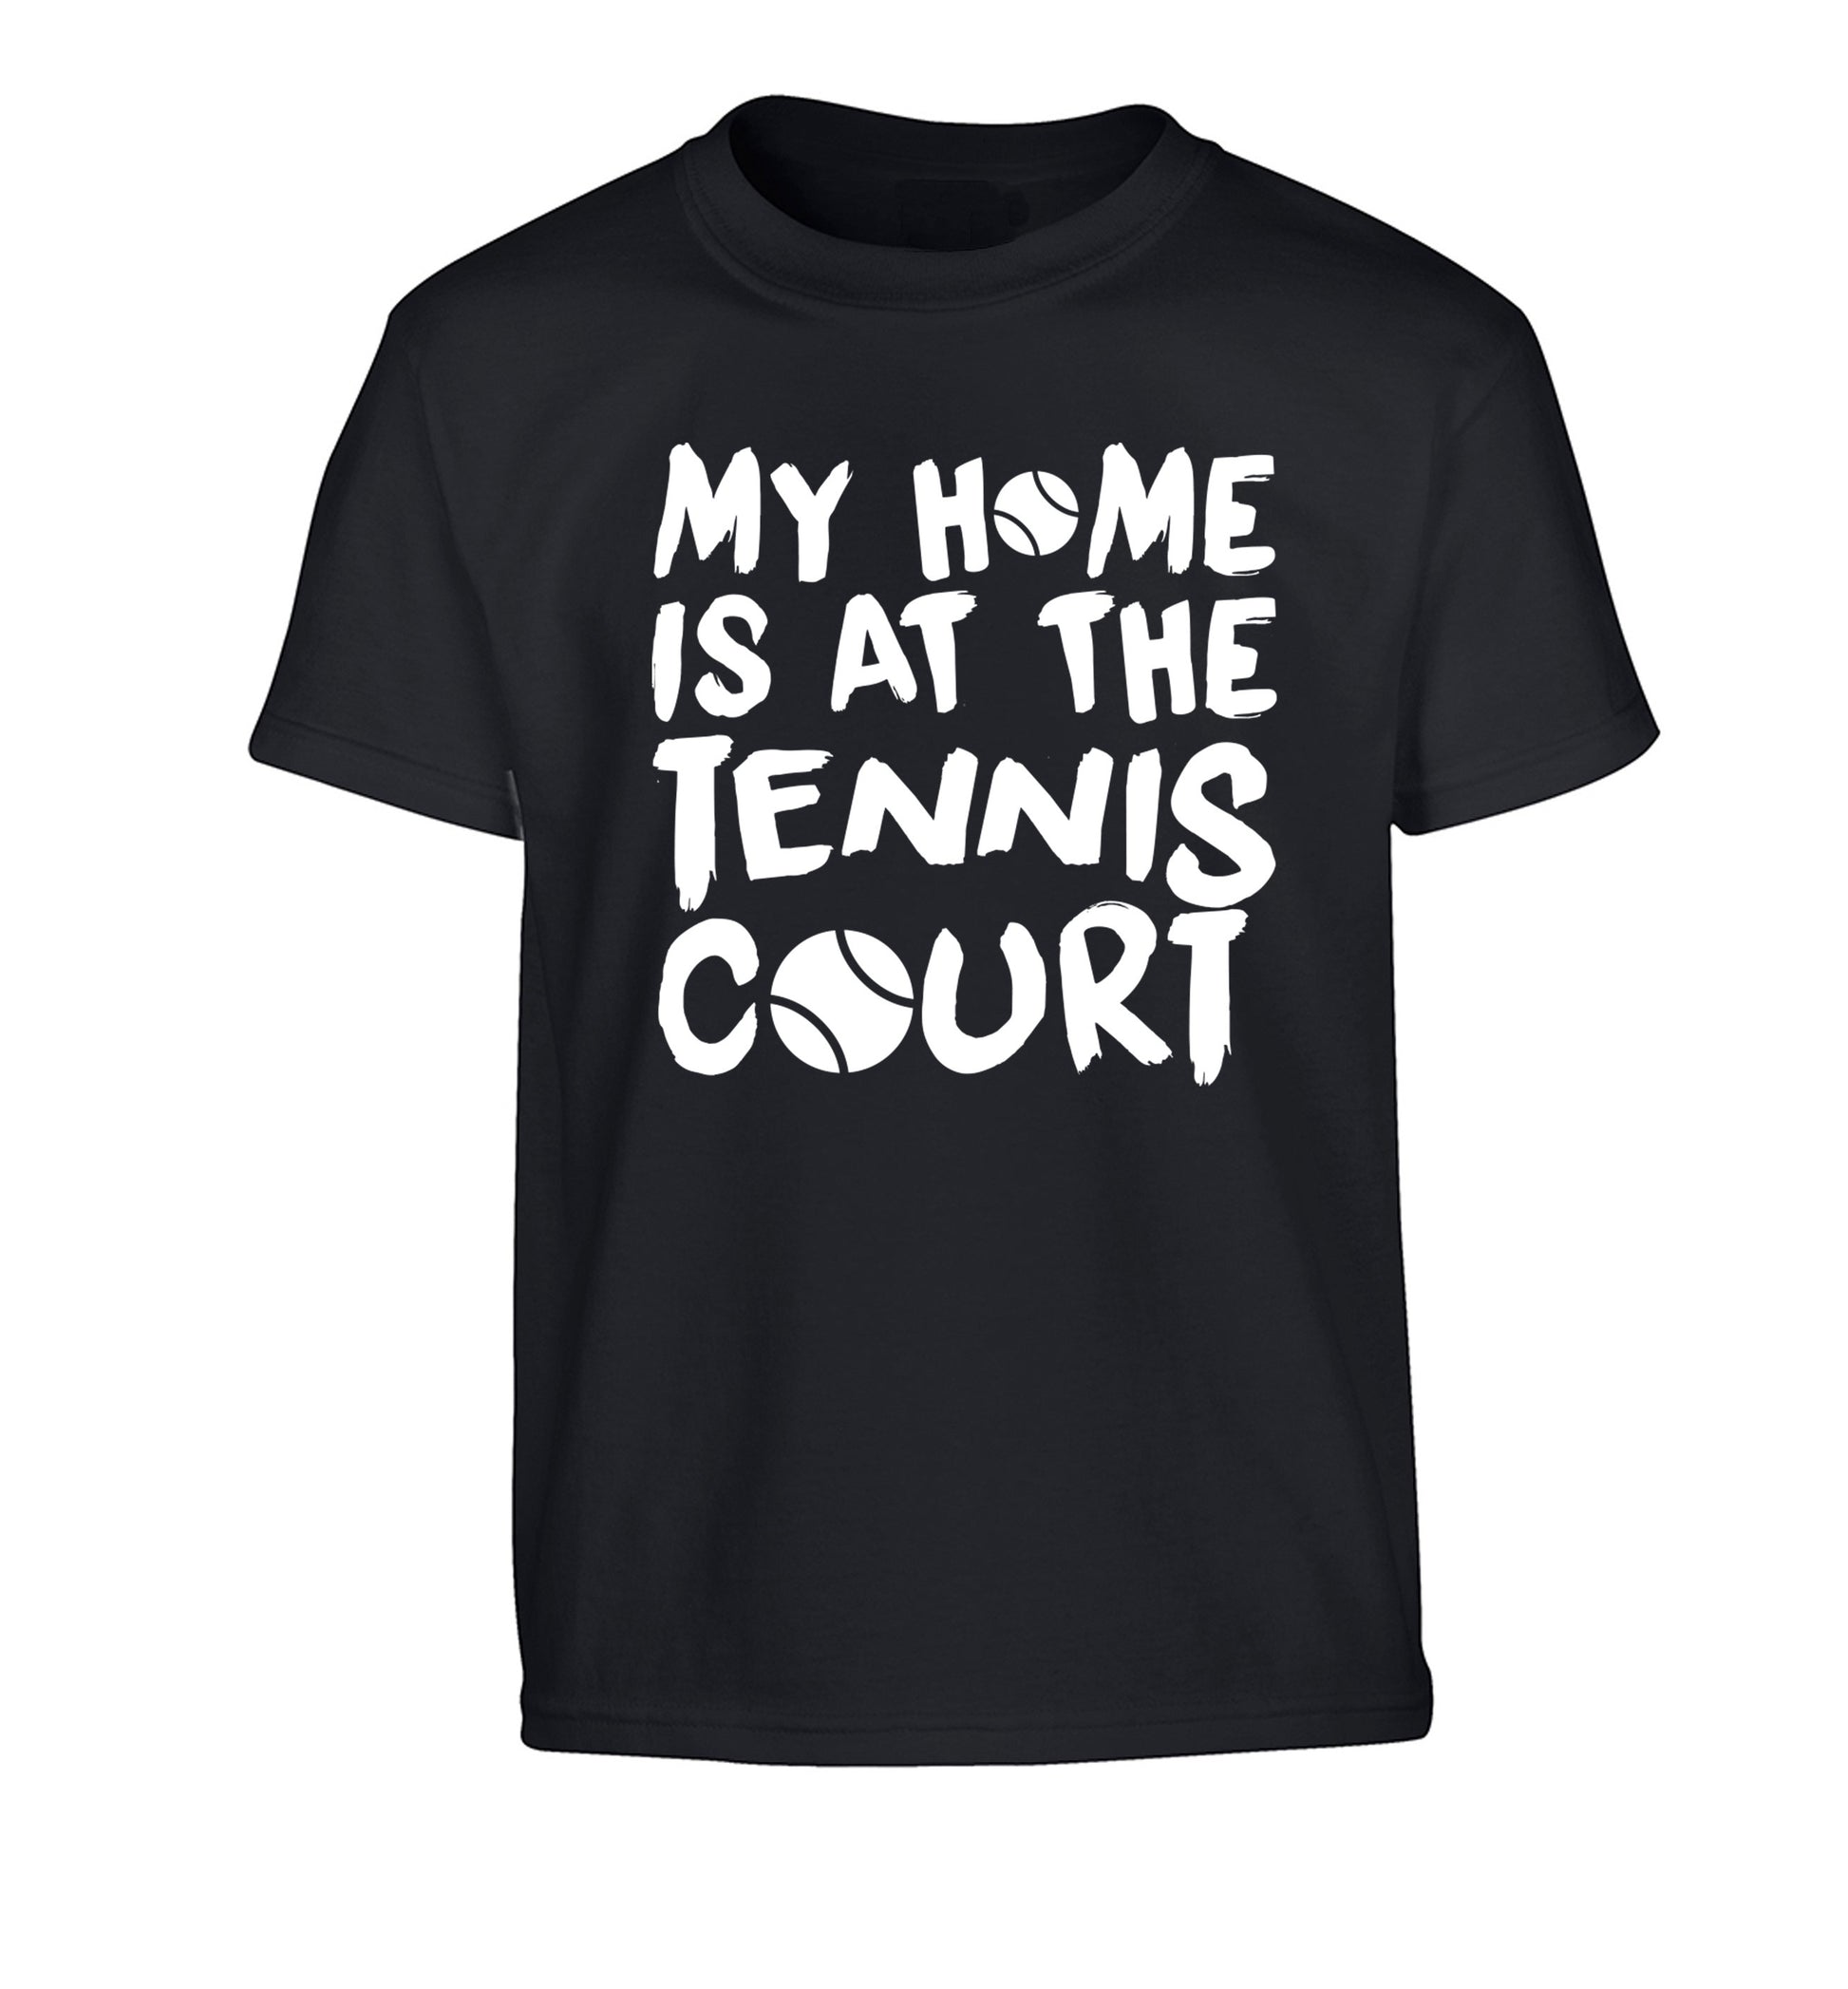 My home is at the tennis court Children's black Tshirt 12-14 Years